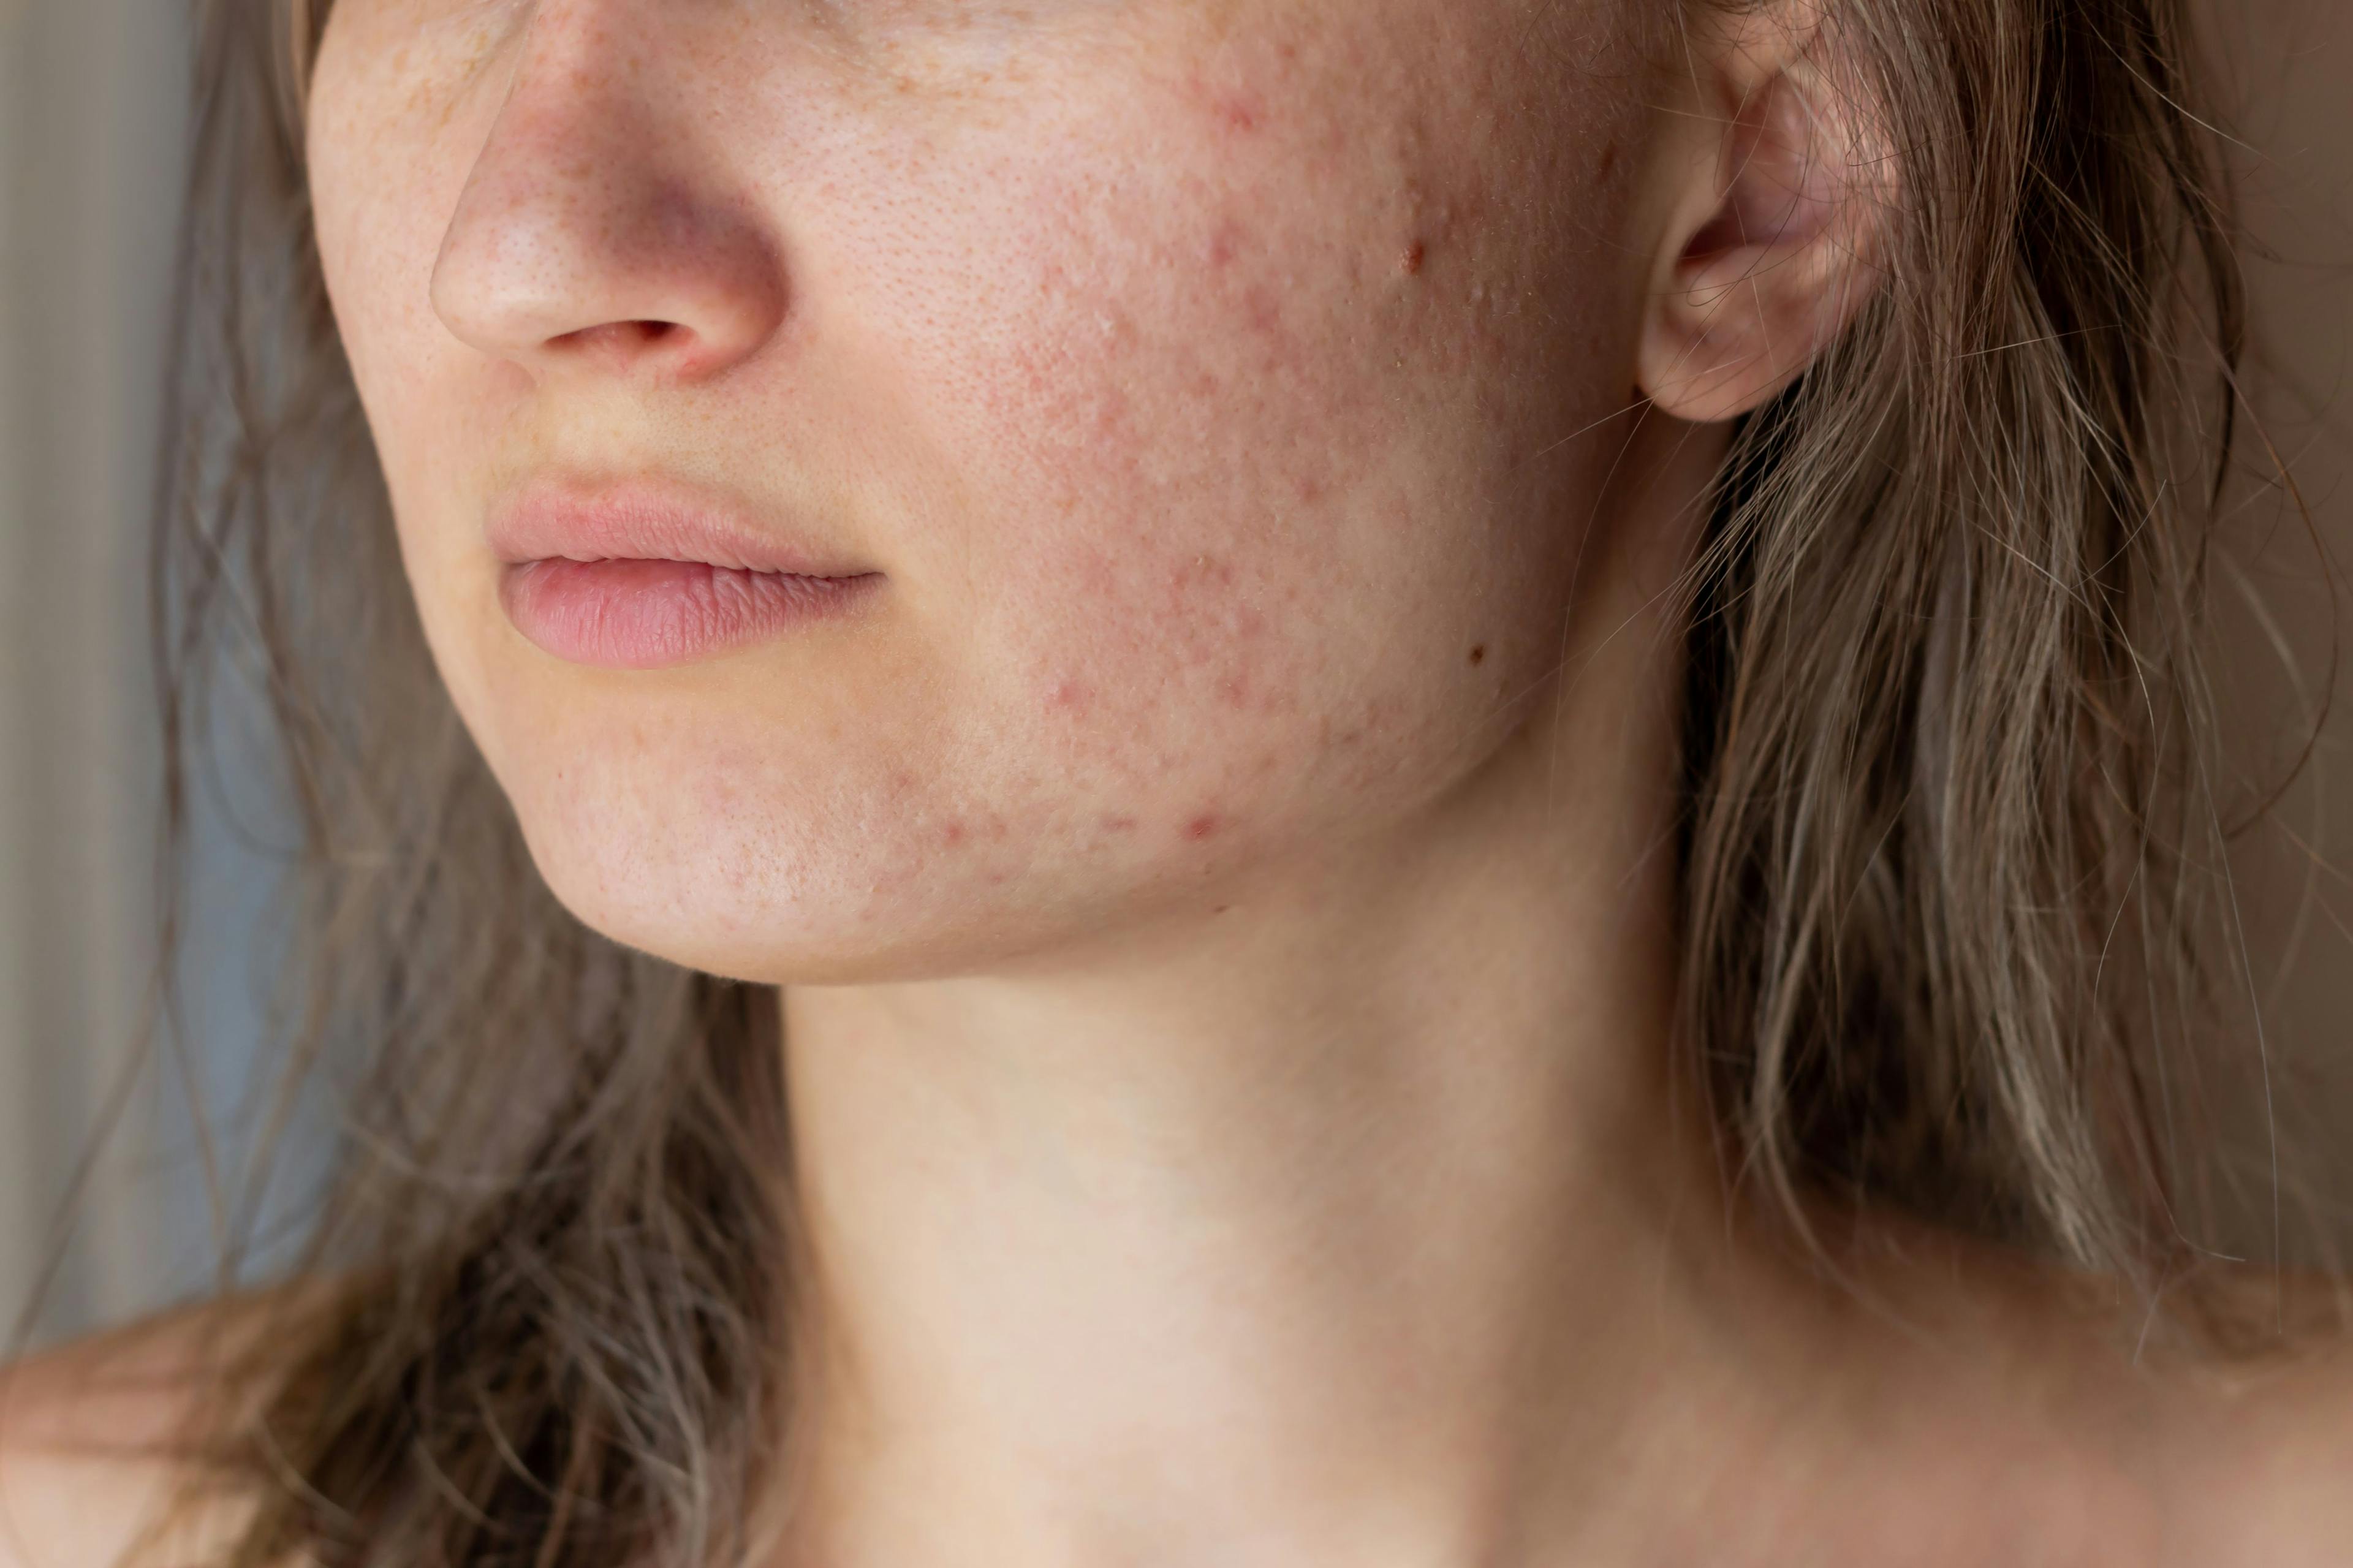 AARS on Supporting and Educating Patients with Acne